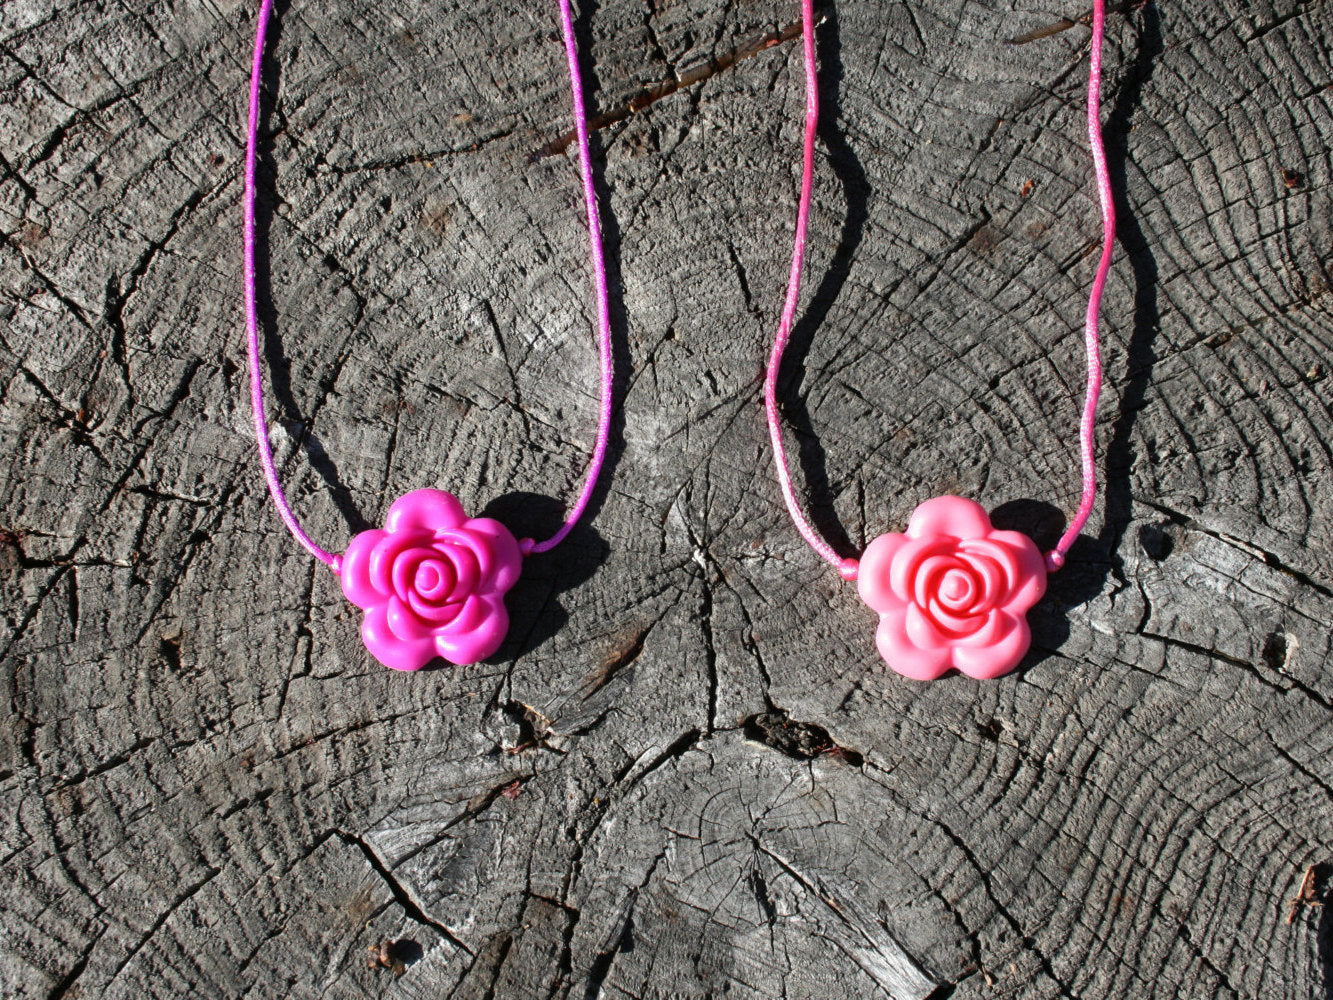 Sensory Necklace with Silicone Rose Pendant- Available in 2 colors: Hot Pink or Light Pink -This pendant and is made from food-grade silicone, strung on a nylon cord, and finished off with a plastic clasp designed to pop open when pulled (Jewelry on wooden background)  